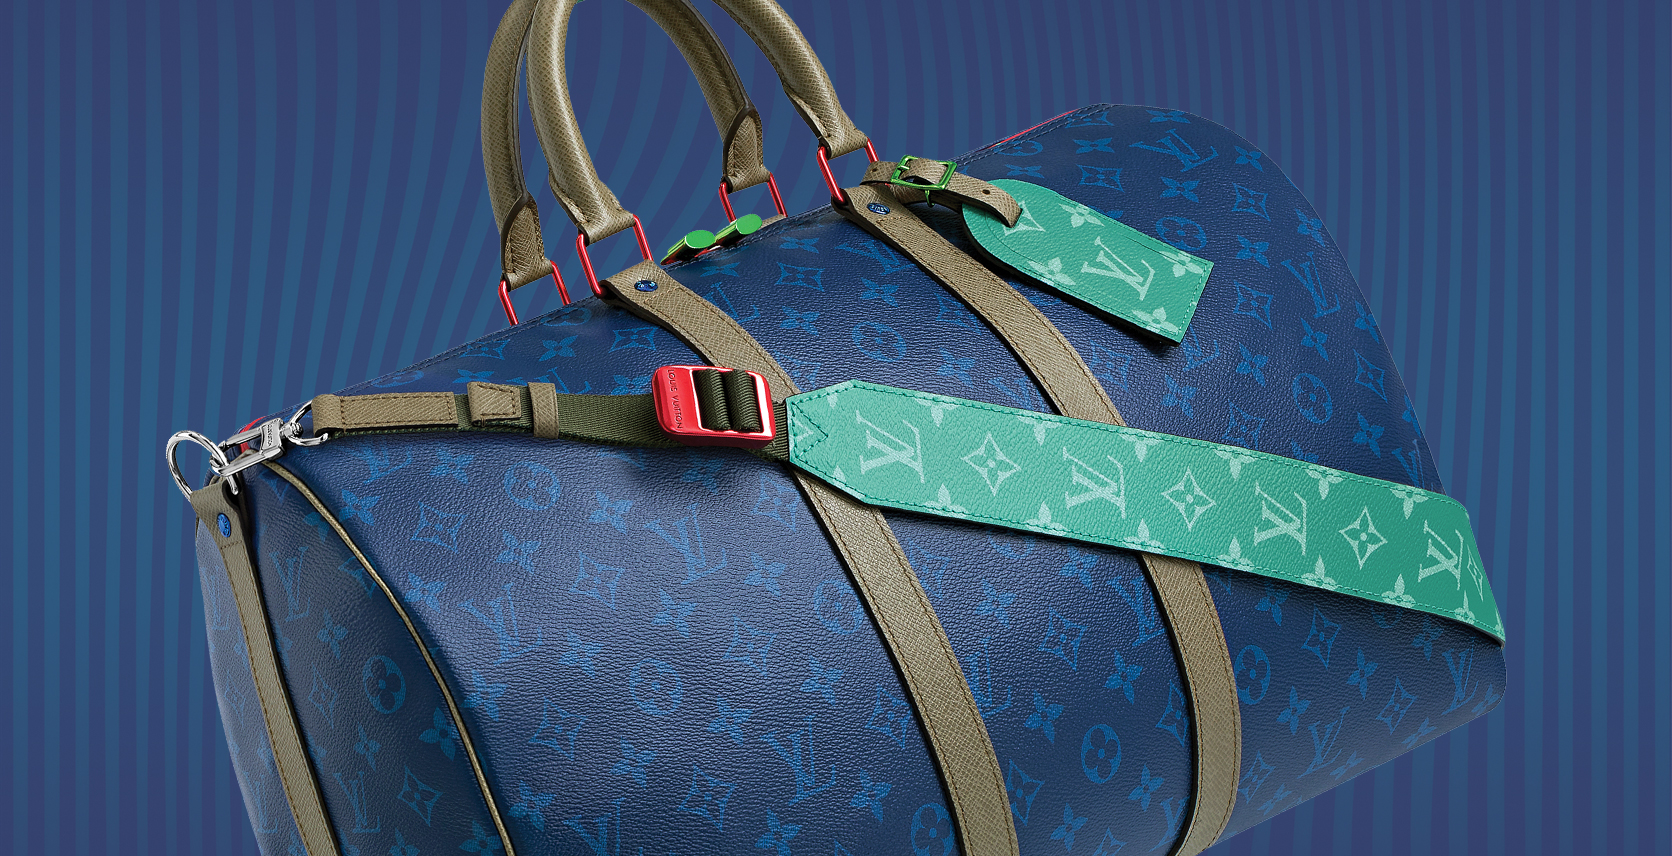 Pack for Spring Break Like a Grown Man with This Louis Vuitton